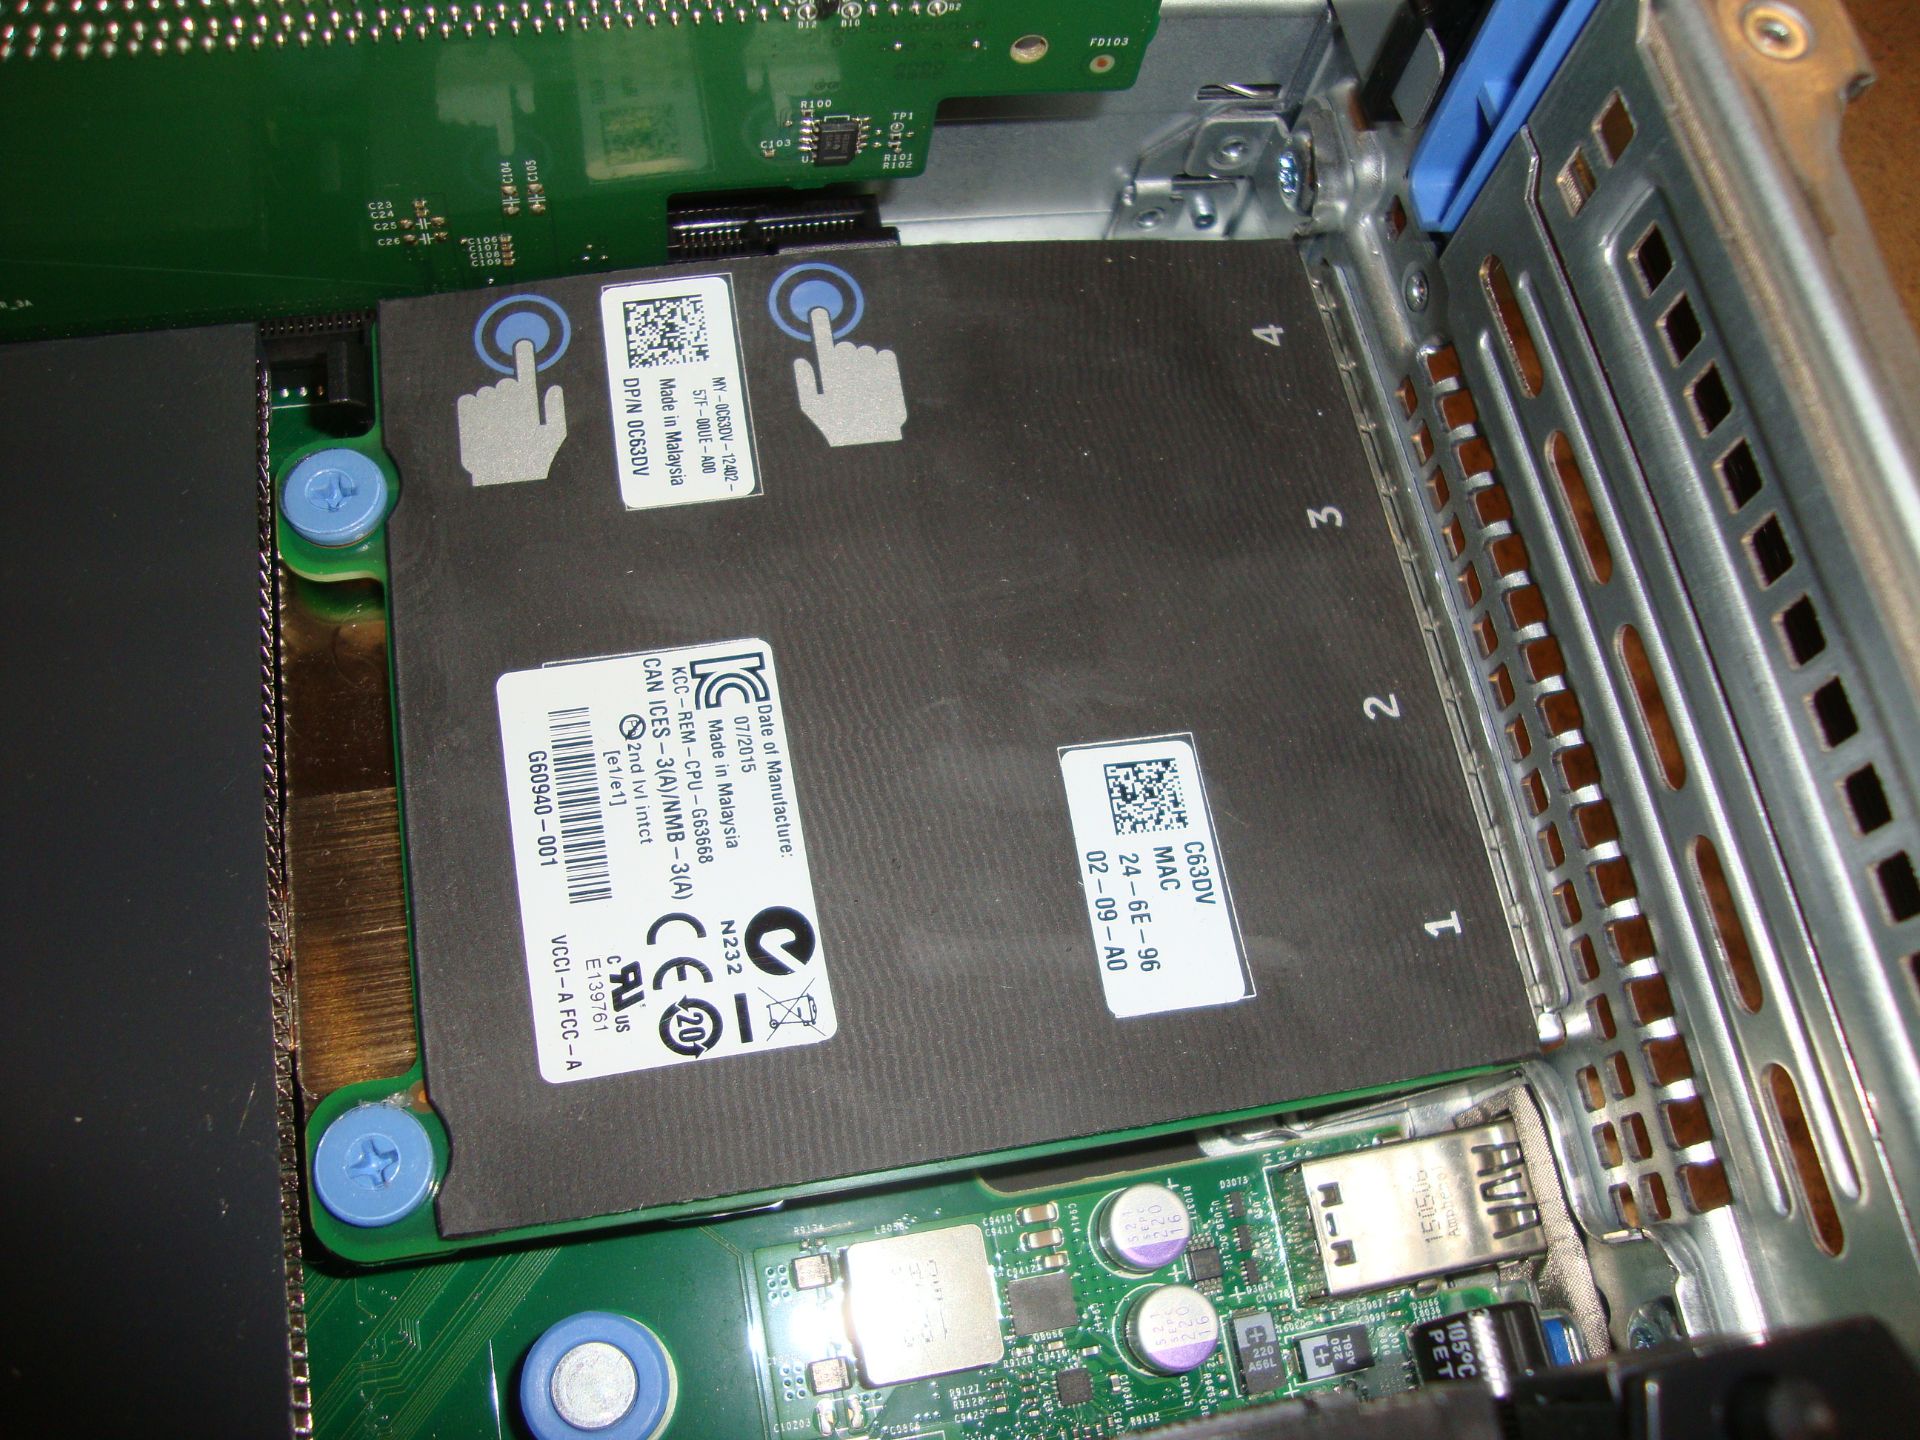 Dell PowerEdge model R730 server with twin Xeon 6 Core E5-2609 V3 1.9 GHz processors, 96Gb RAM, - Image 9 of 15